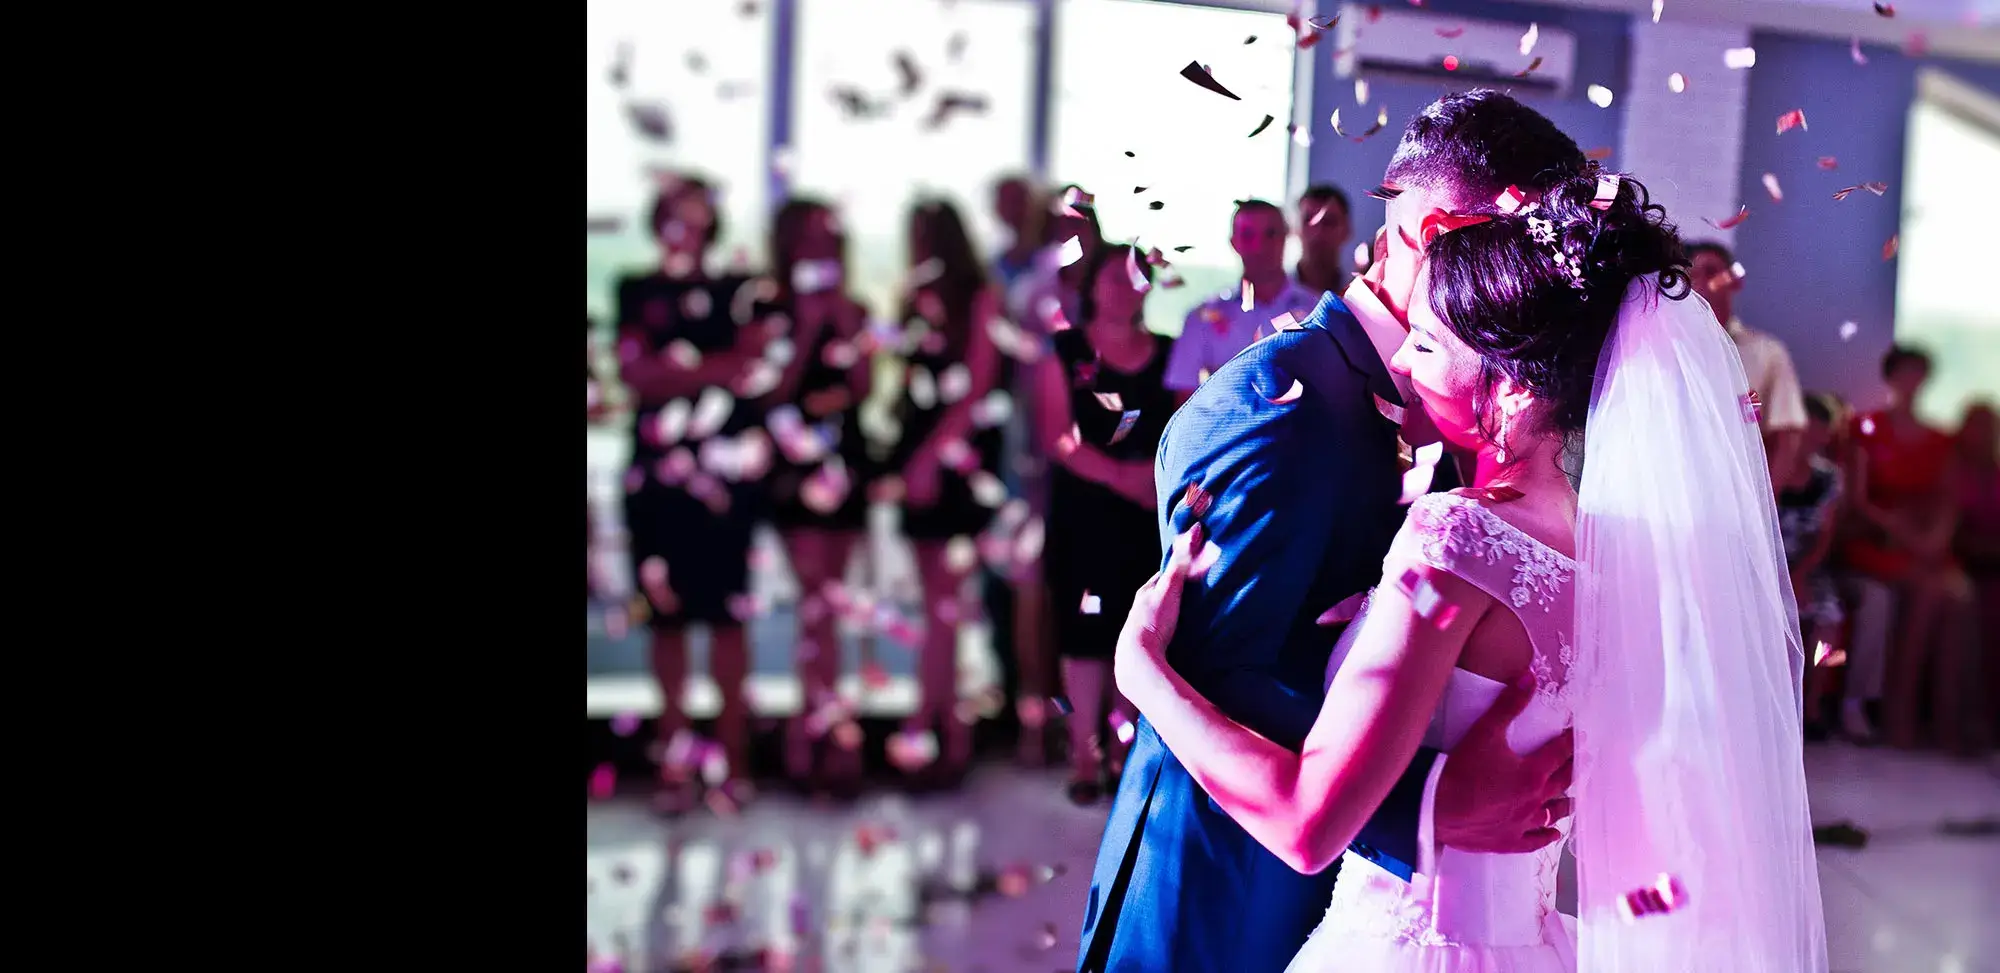 A bride and groom sharing a romantic kiss amidst a shower of confetti at their Pennsylvania wedding.